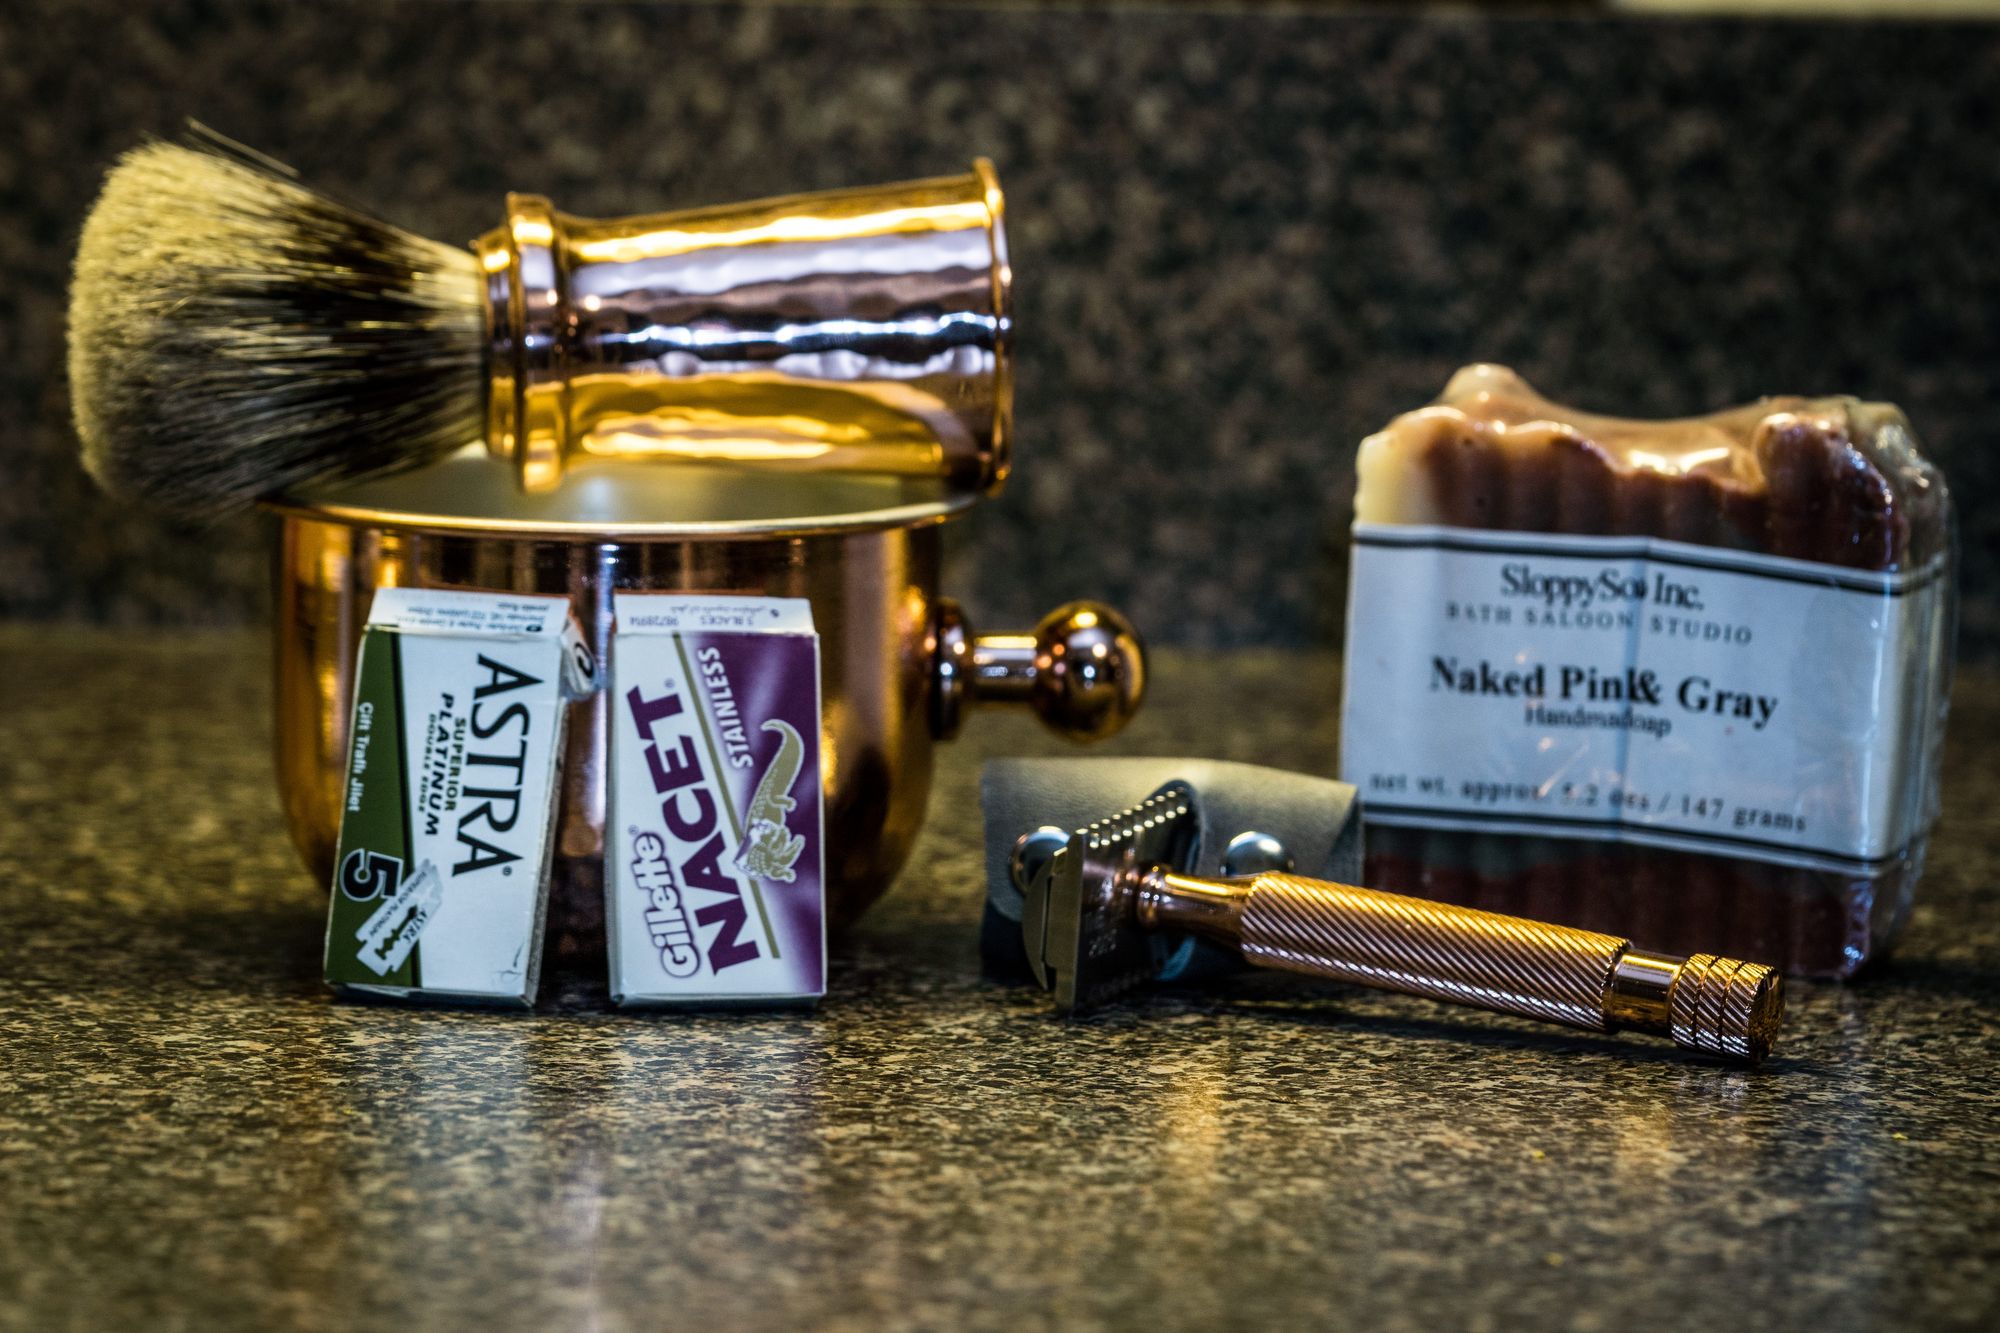 A shave brush, DE safety razor, shave cup, razor blade packs and bar soap